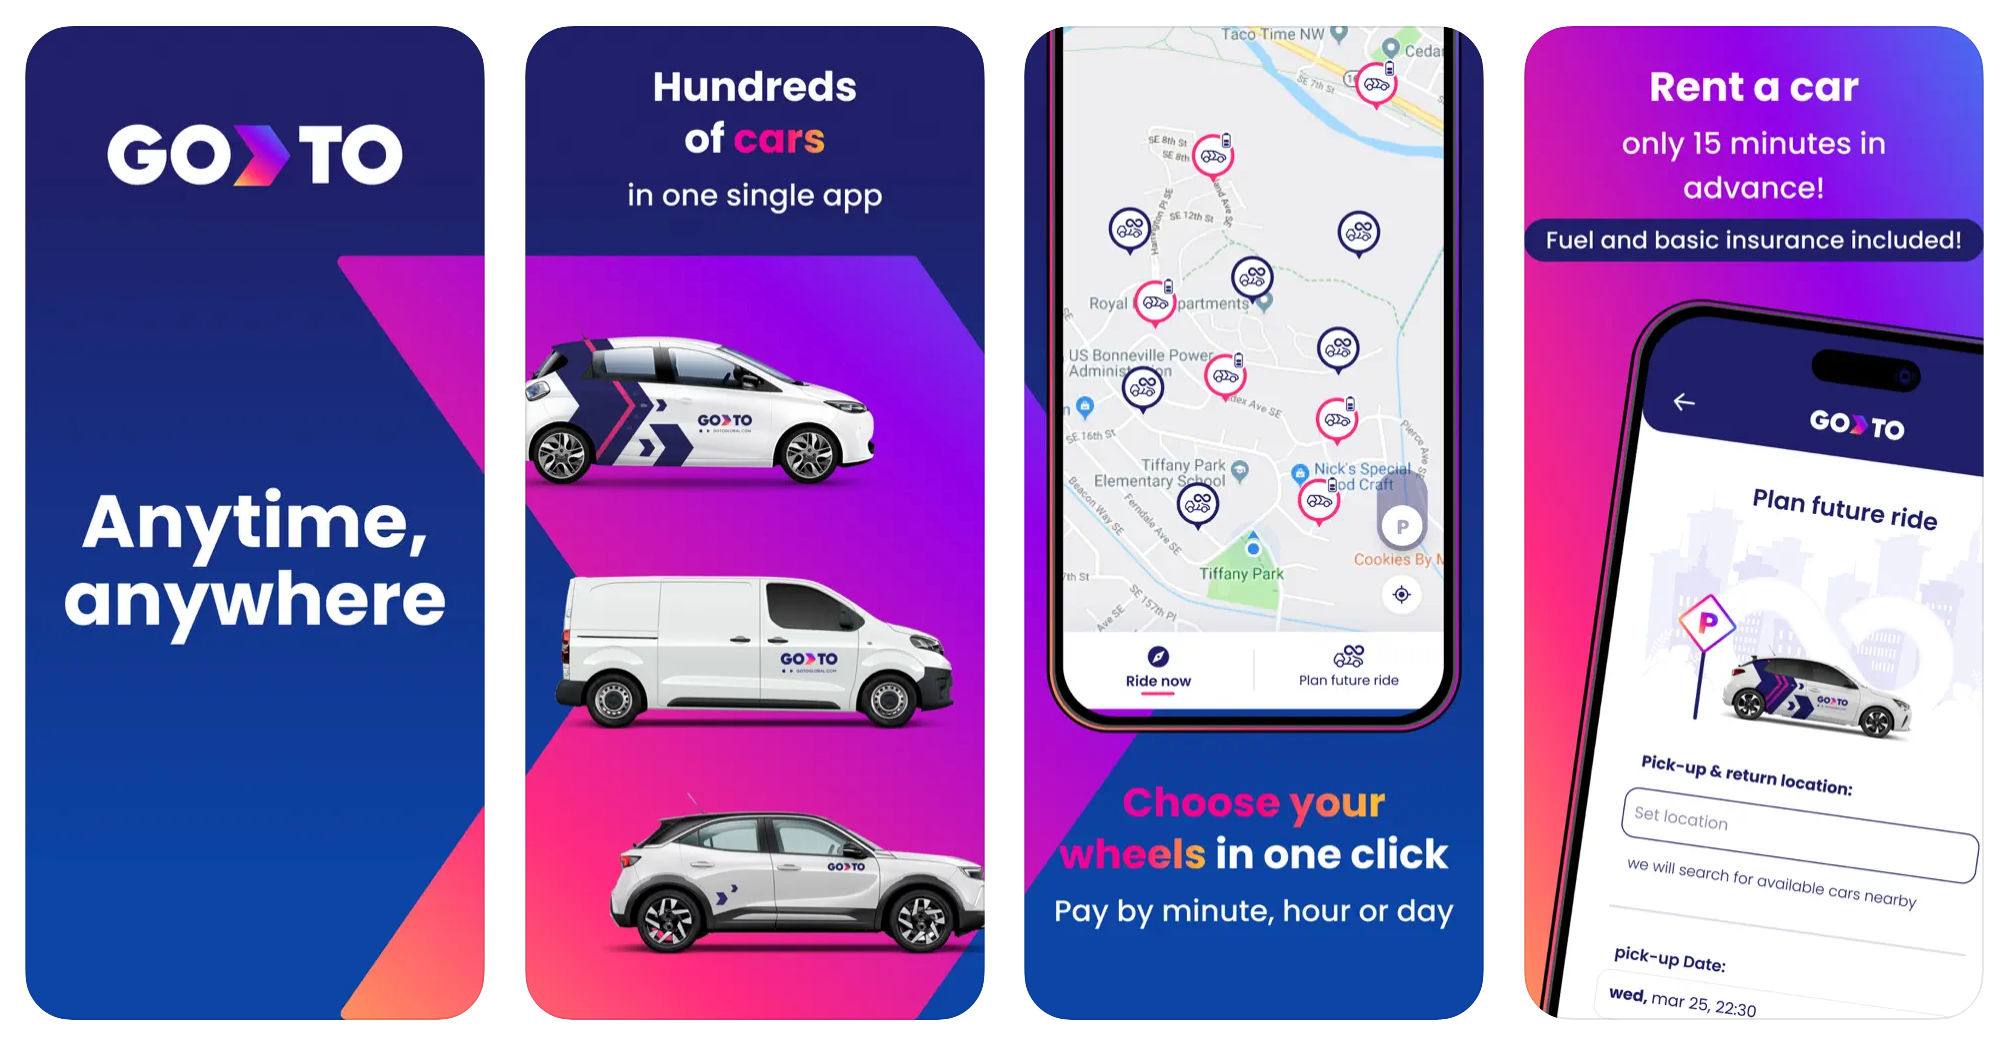 Carsharing services such as GoTo Carsharing seek to reduce car ownership using the Transportation-as-a-Service model. 